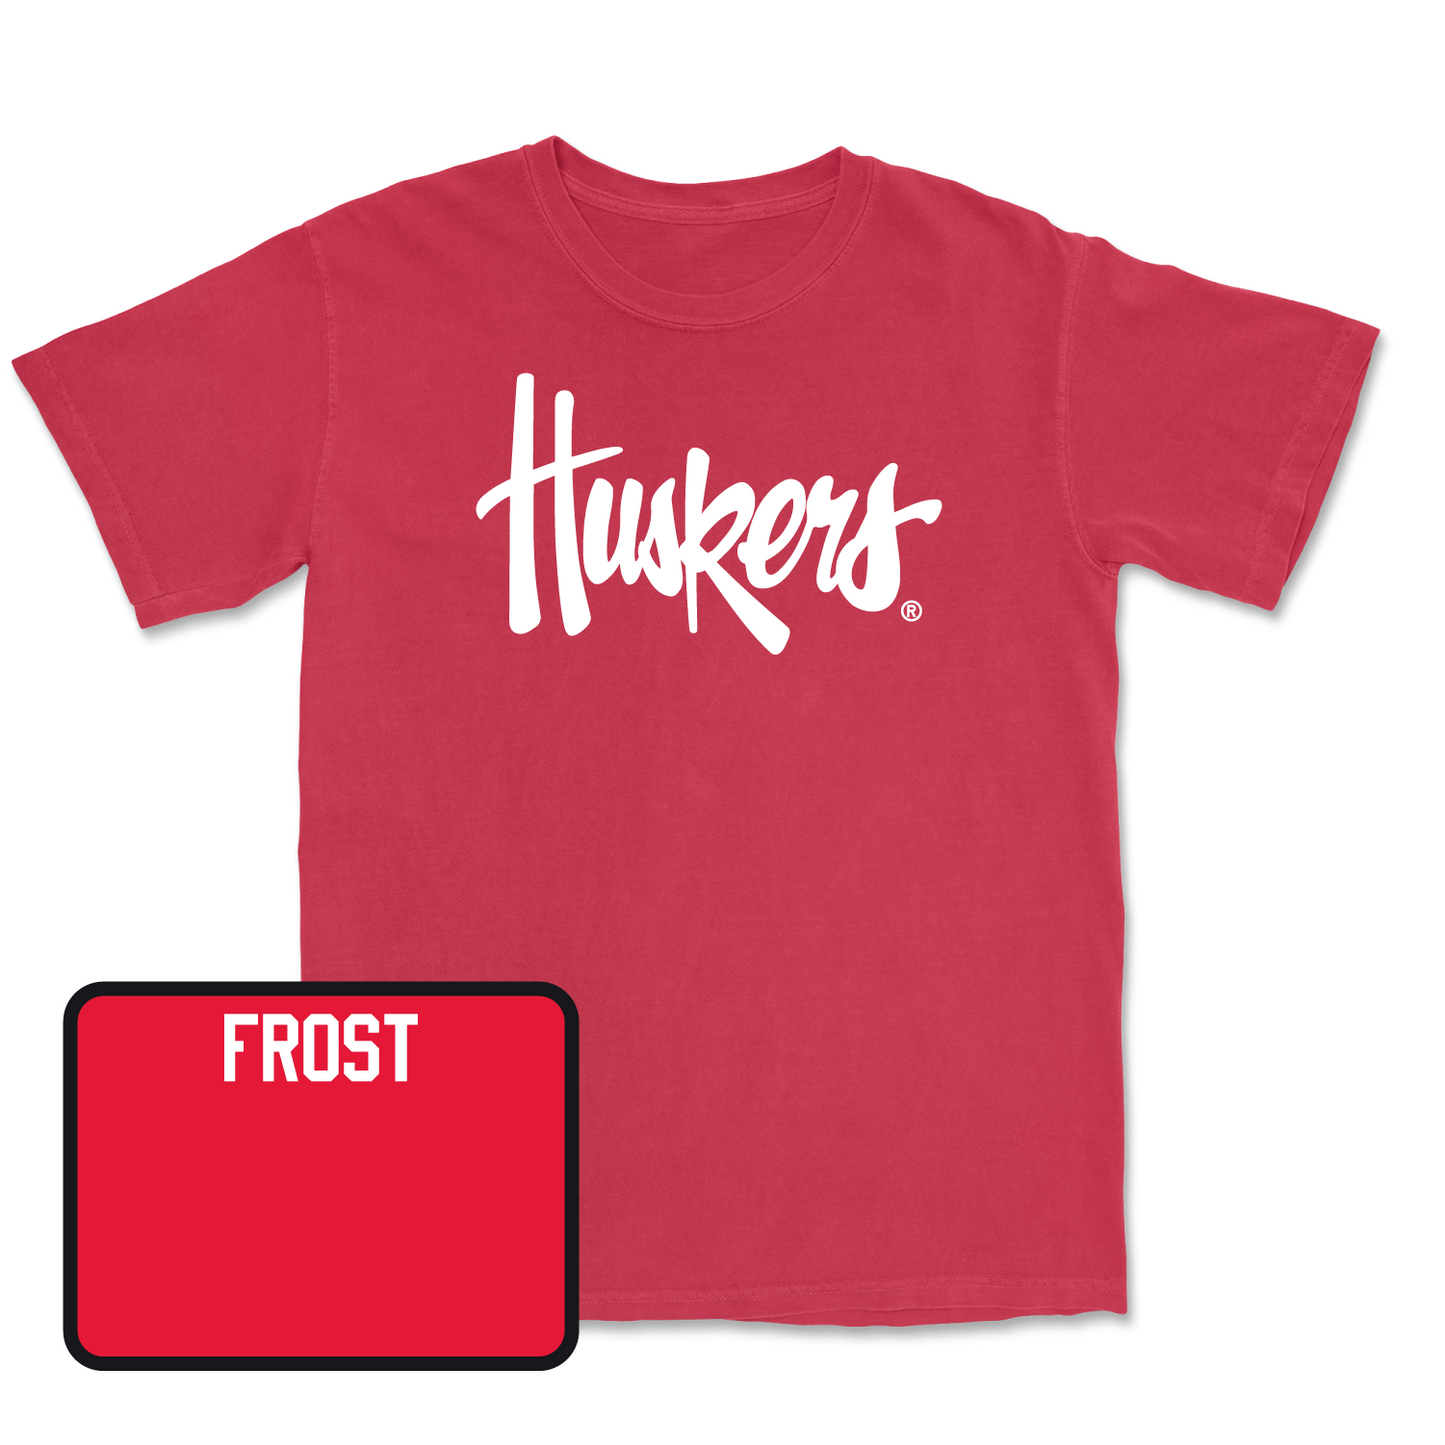 Red Women's Gymnastics Huskers Tee Youth Large / Emalee Frost